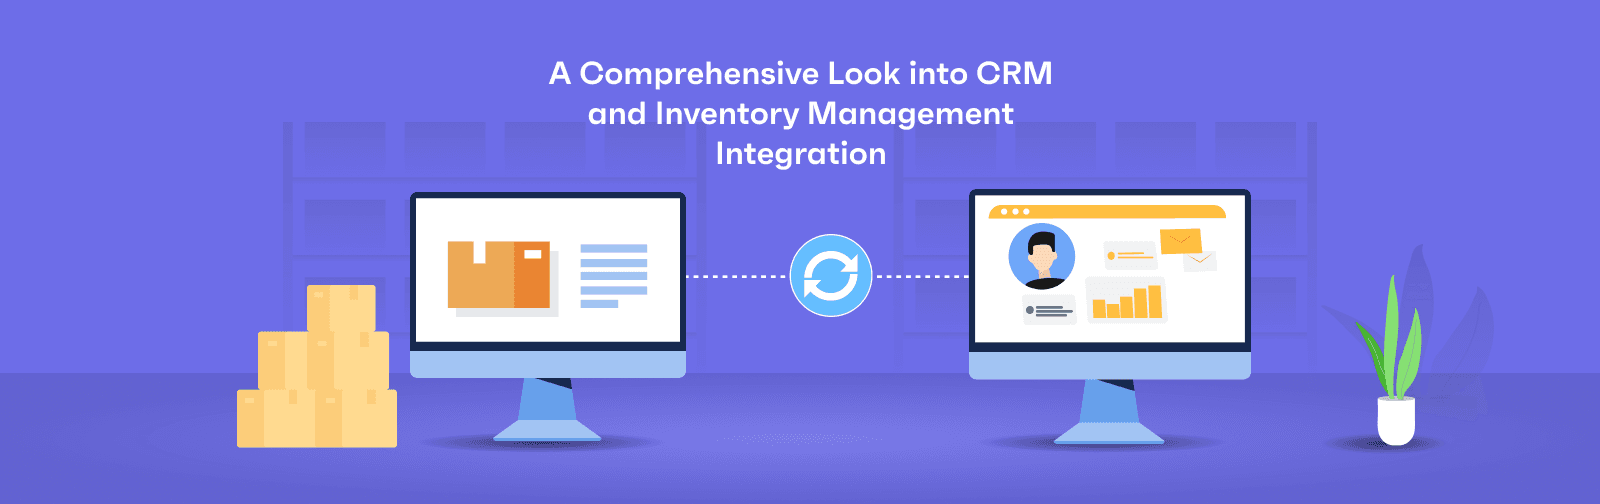 Comprehensive Look into CRM and Inventory Management Integration